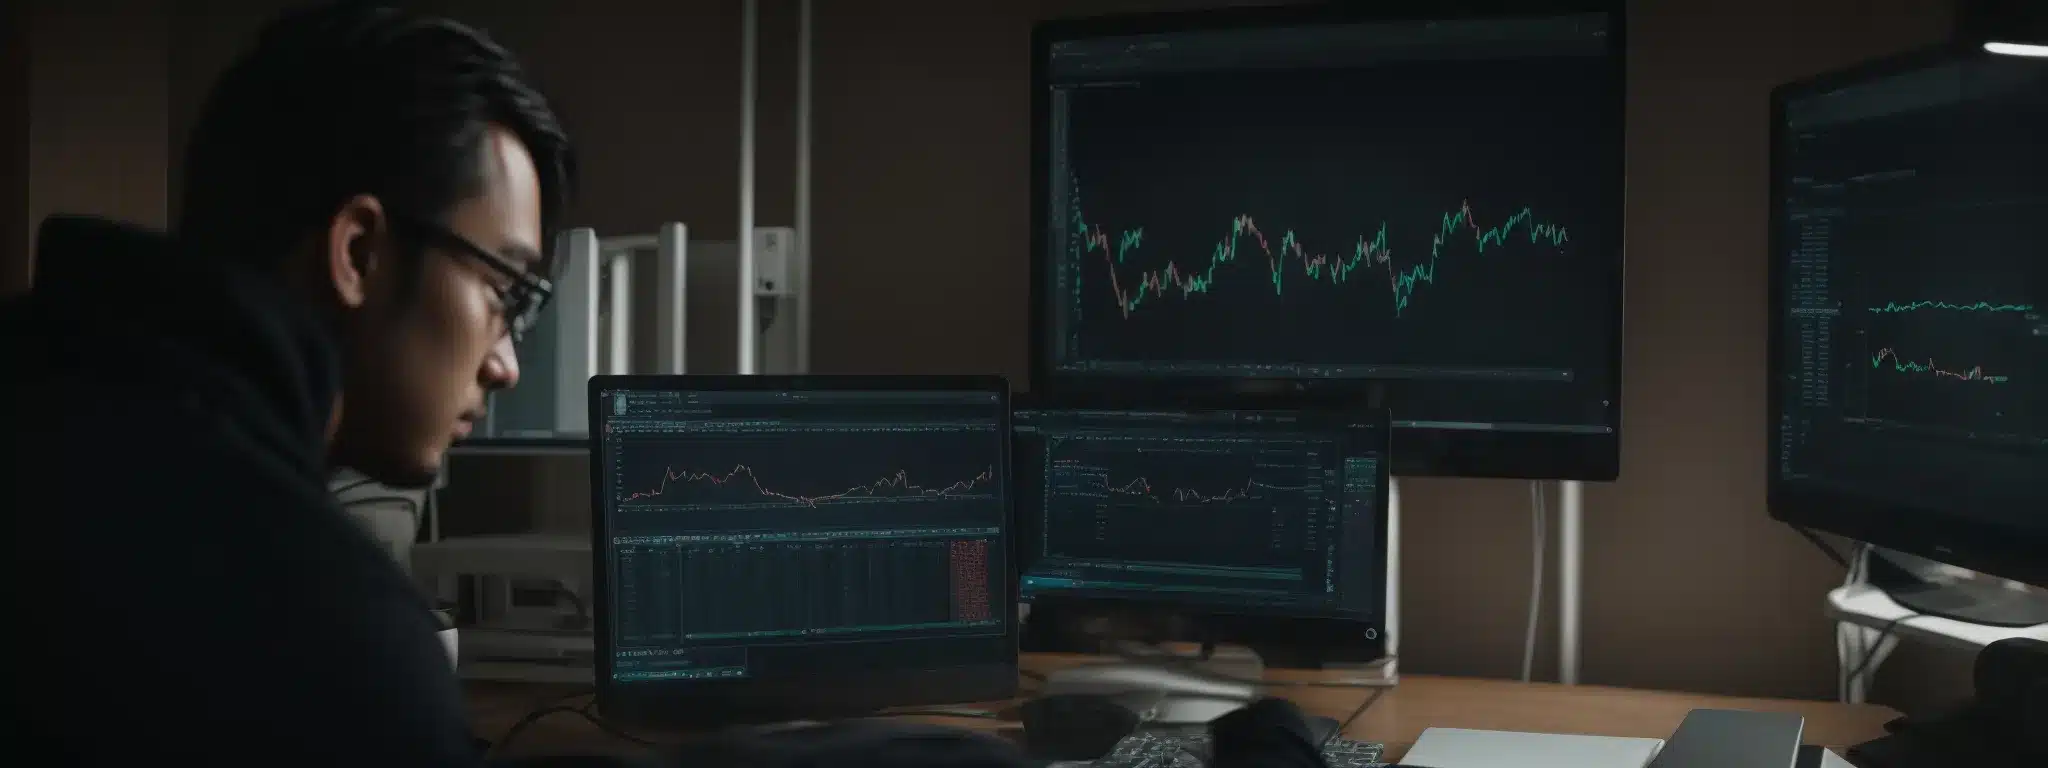 A Marketer Analyzes Graphs On A Computer Screen, Revealing Trends And Insights.